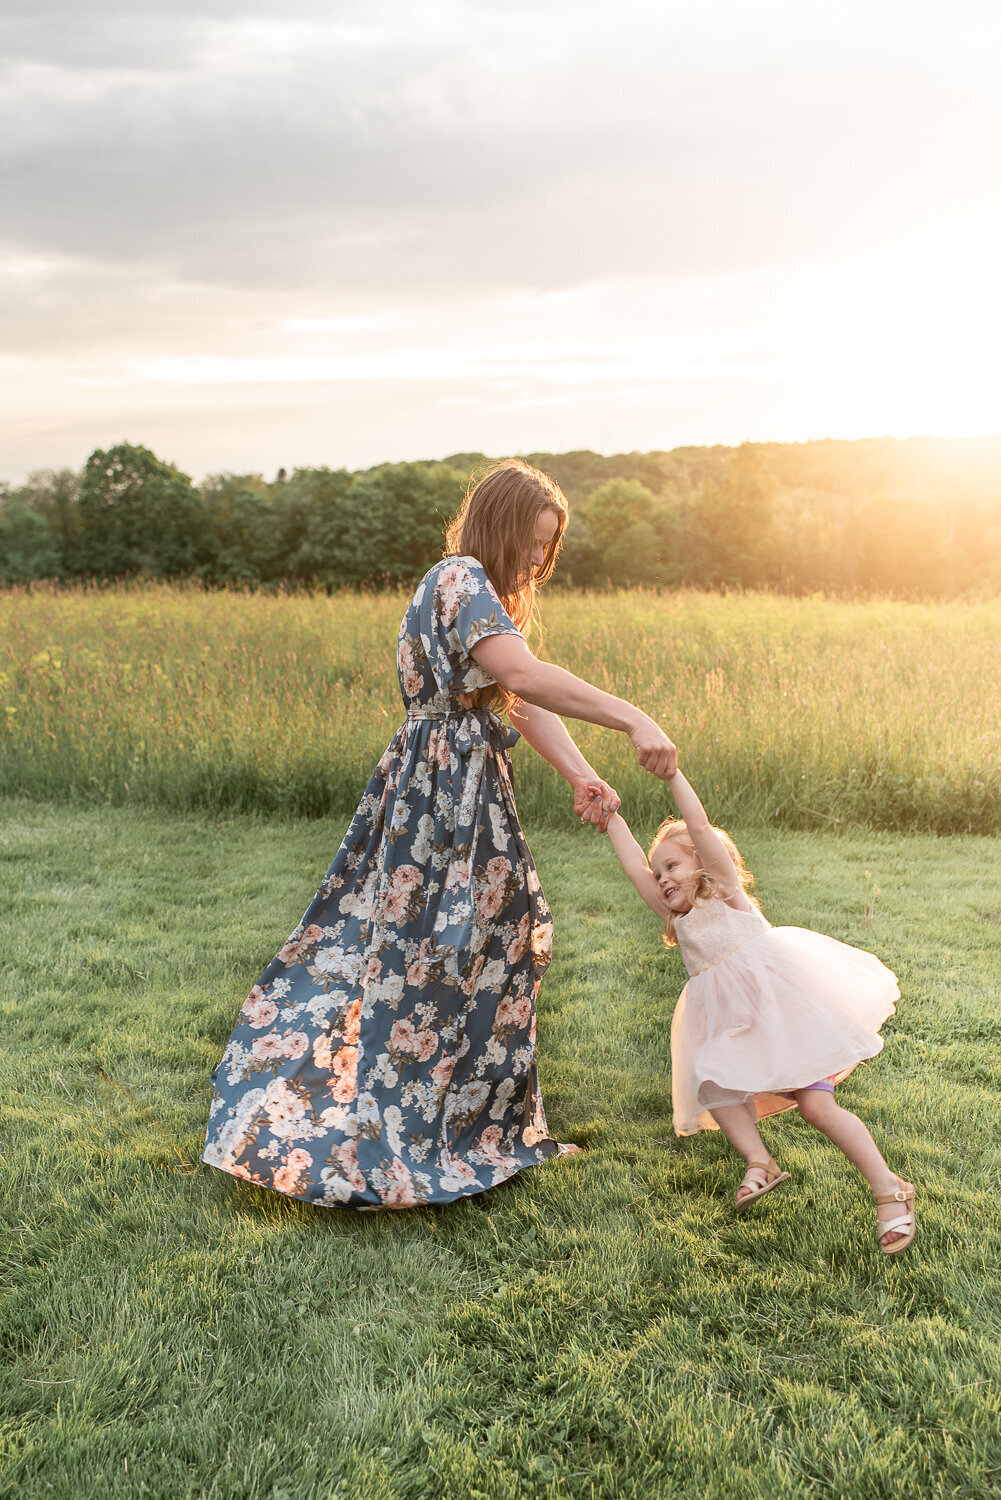 Mother twirling daughter at sunset in field for family session |Sharon Leger Photography | Canton, CT Newborn & Family Photographer